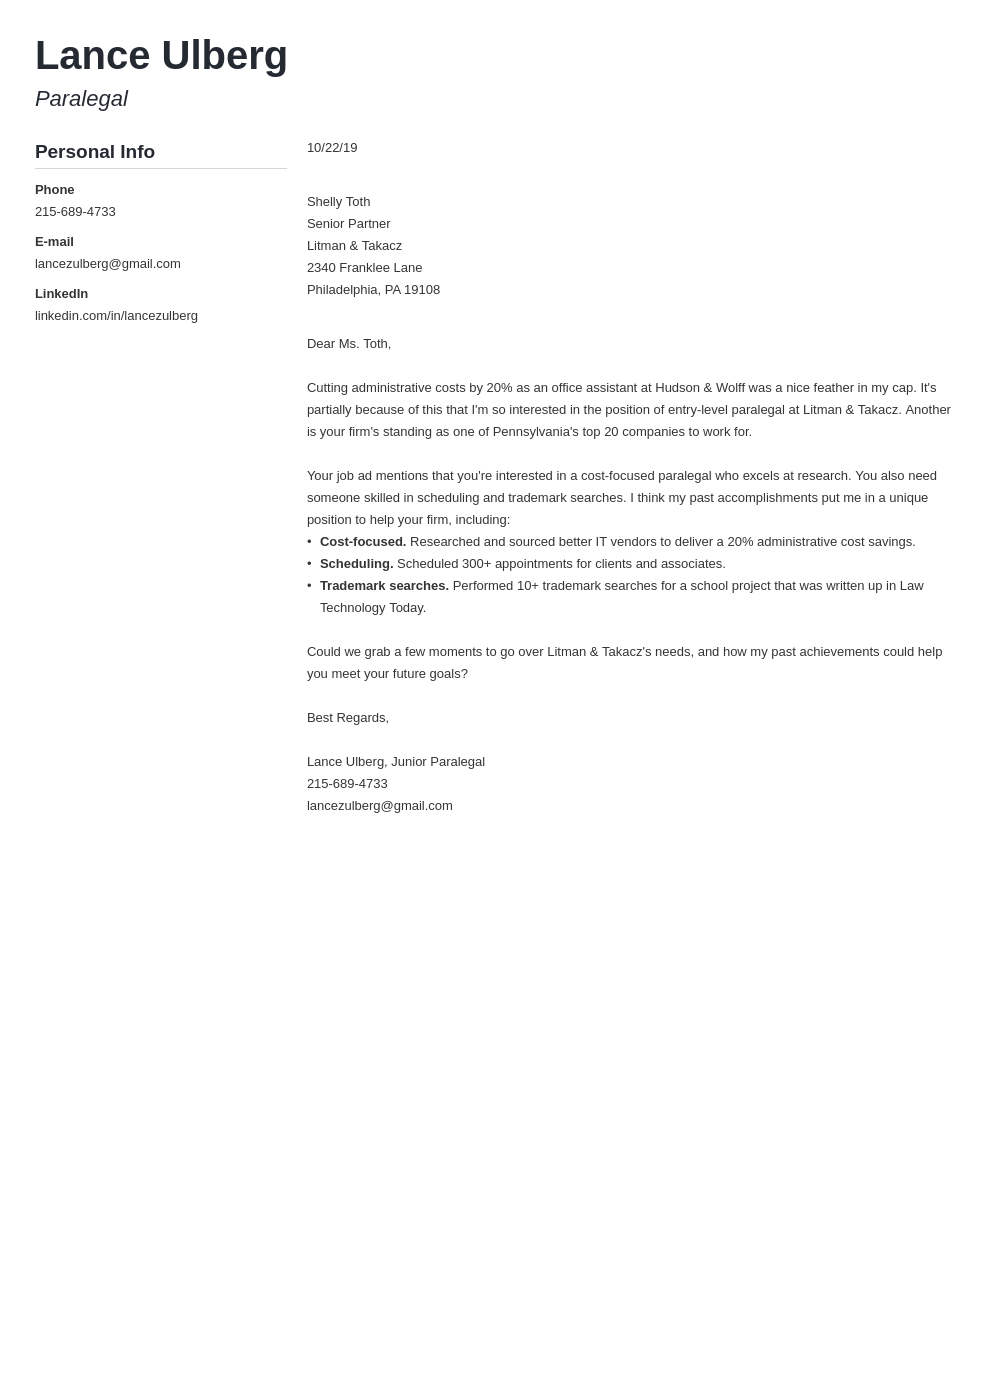 Paralegal Cover Letter: Examples & Ready-to-Use Templates